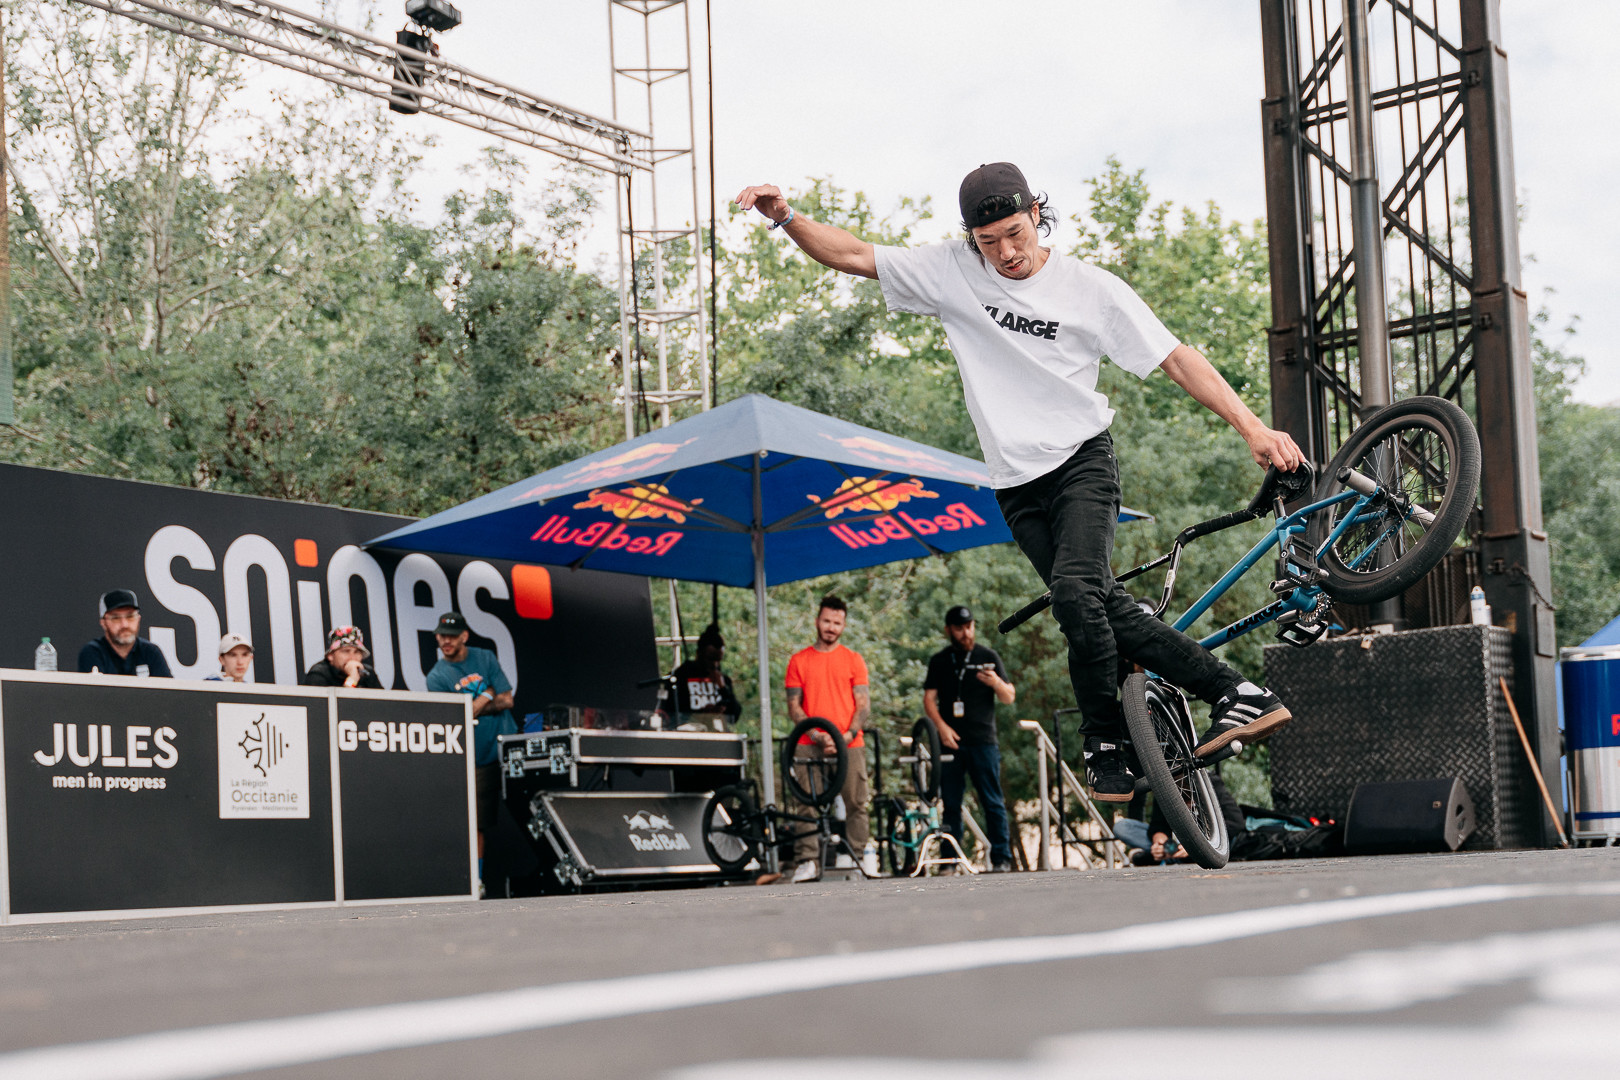 Competition also took place in BMX flatland which is described as a form of artistic cycling with a blend of breakdancing ©Hurricane-FISE